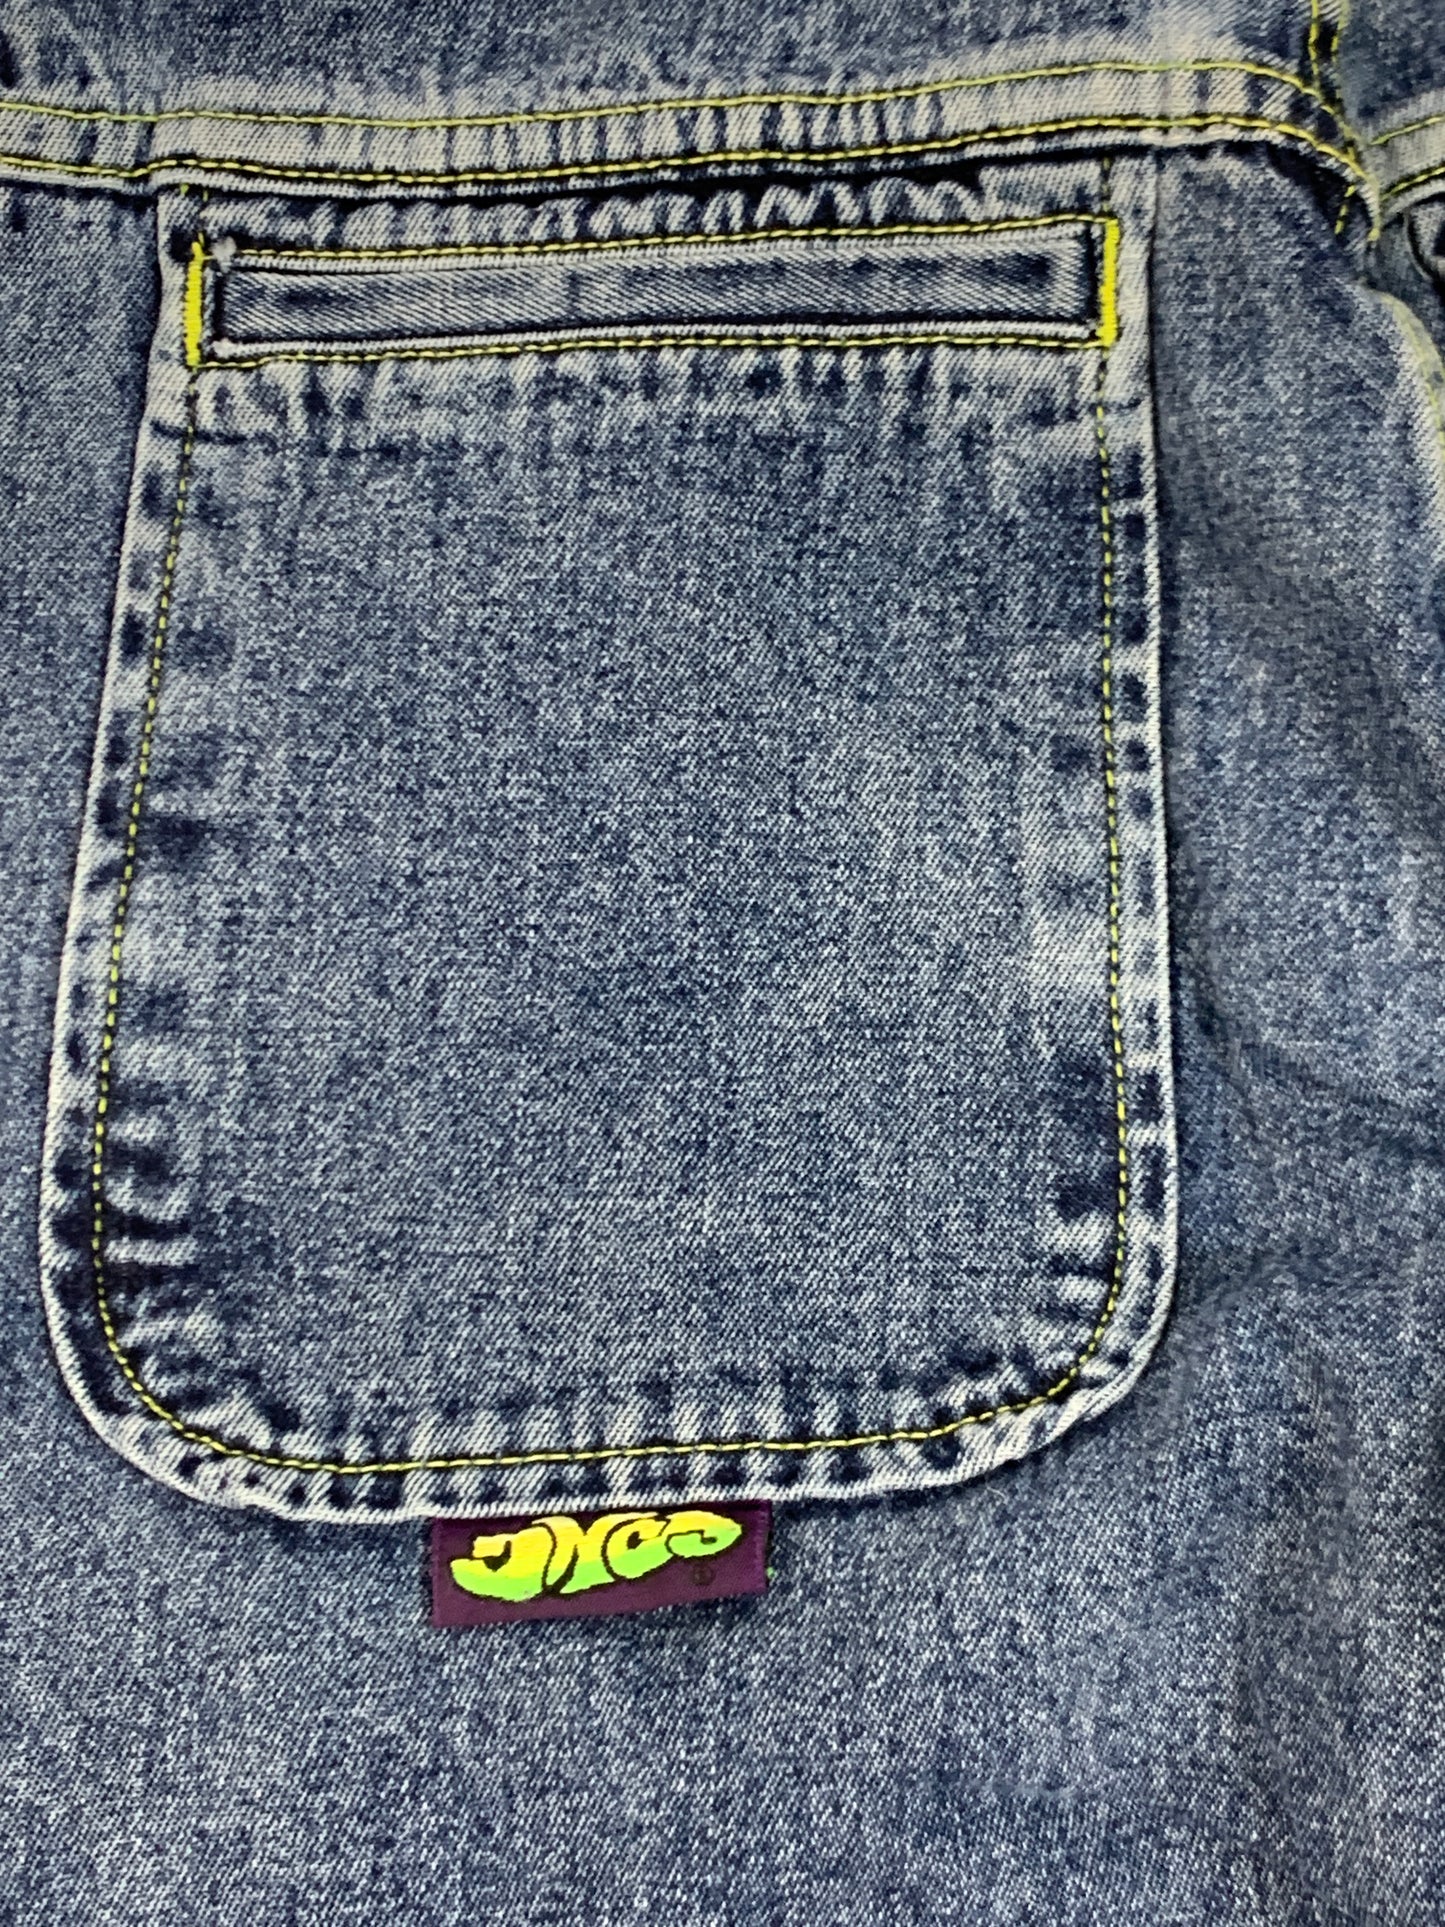 JNCO 20'' Rewind Vintage Baggy Girl Embroidery Wide Jeans - 9